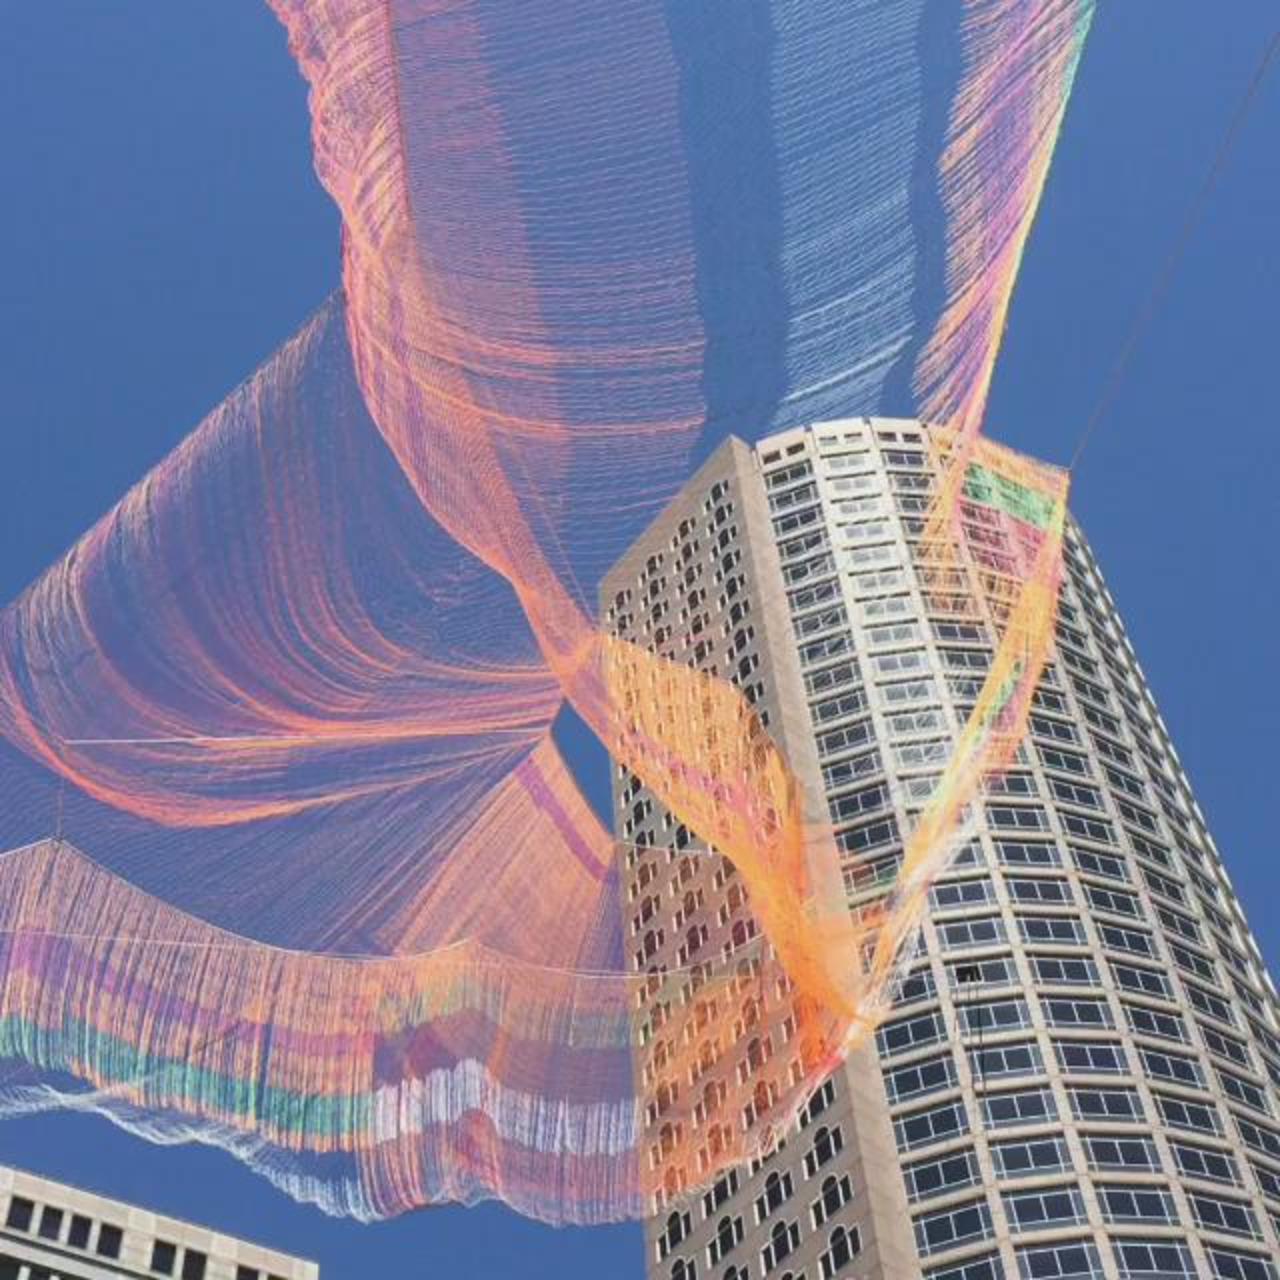 Installation day — Aerial sculpture by @JanetEchelman on the @HelloGreenway #publicart http://t.co/fm3bDSiwI6